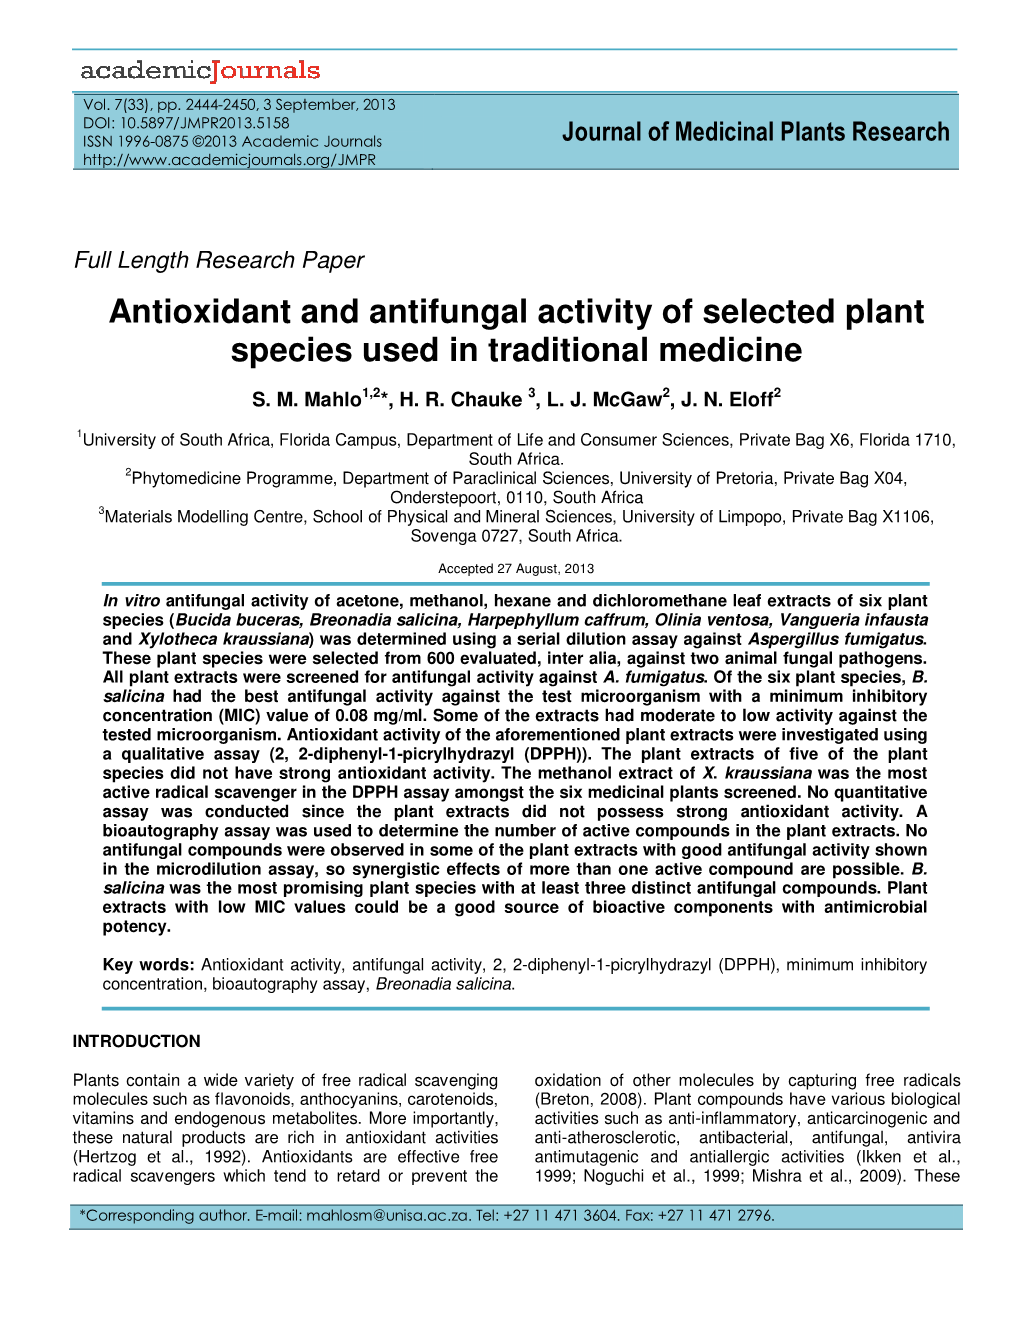 Antioxidant and Antifungal Activity of Selected Plant Species Used in Traditional Medicine